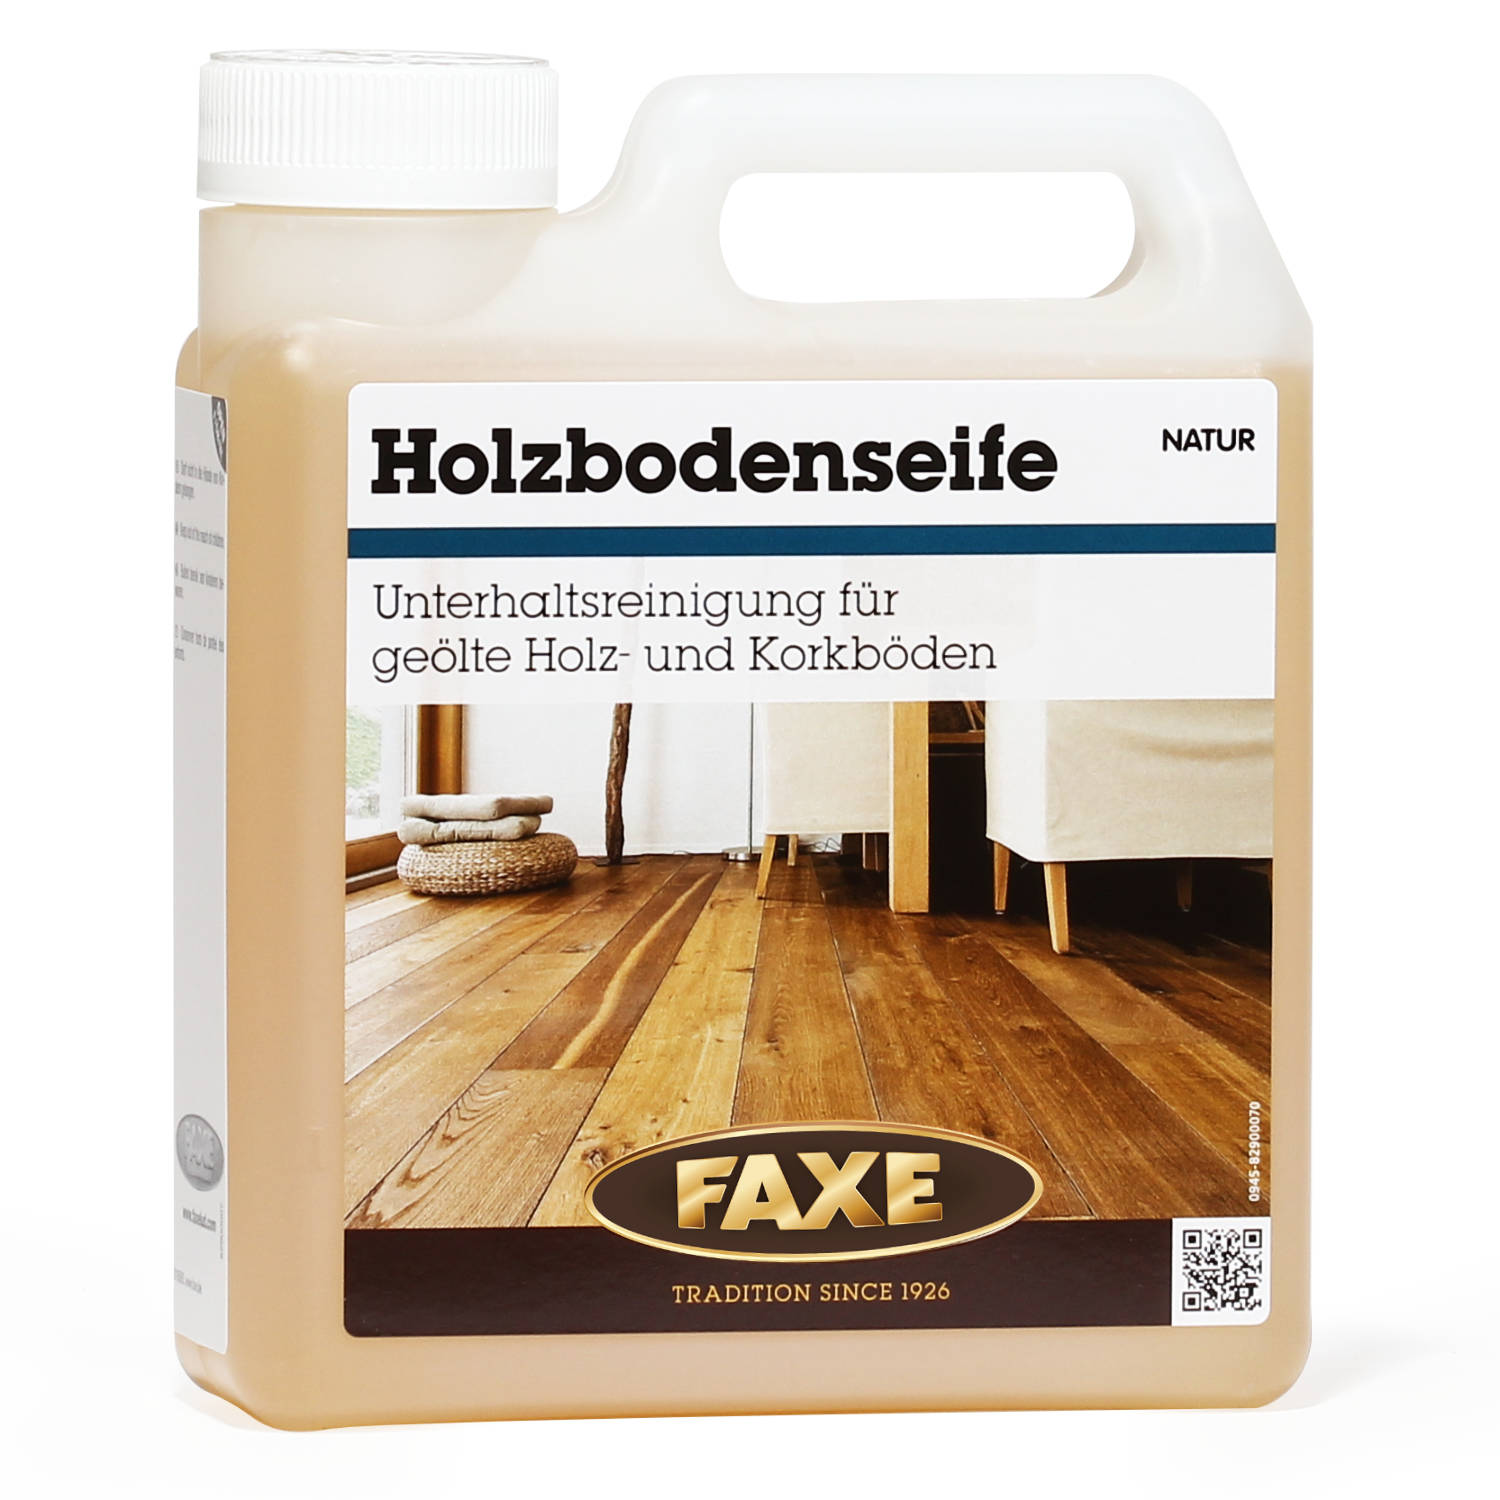 Faxe Holzbodenseife natur